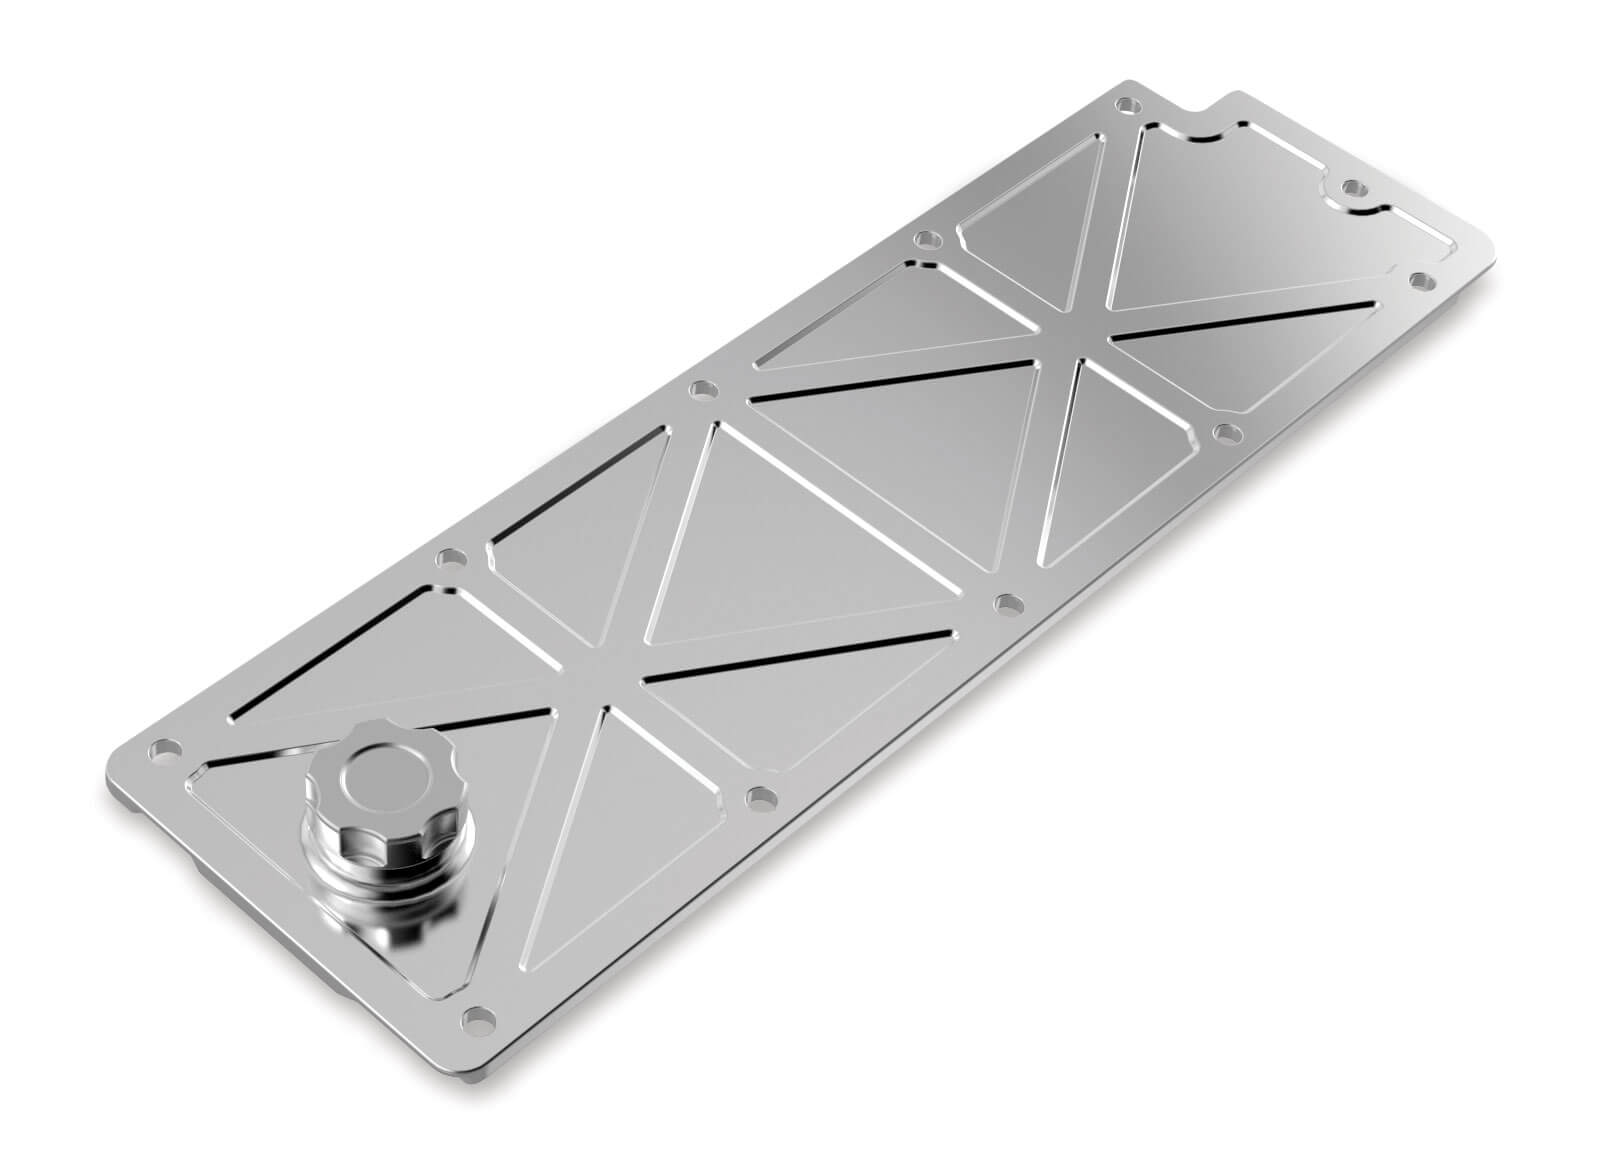 Holley LS2/LS3/LS7/LSX Valley Cover with Oil Fill - Polished Billet